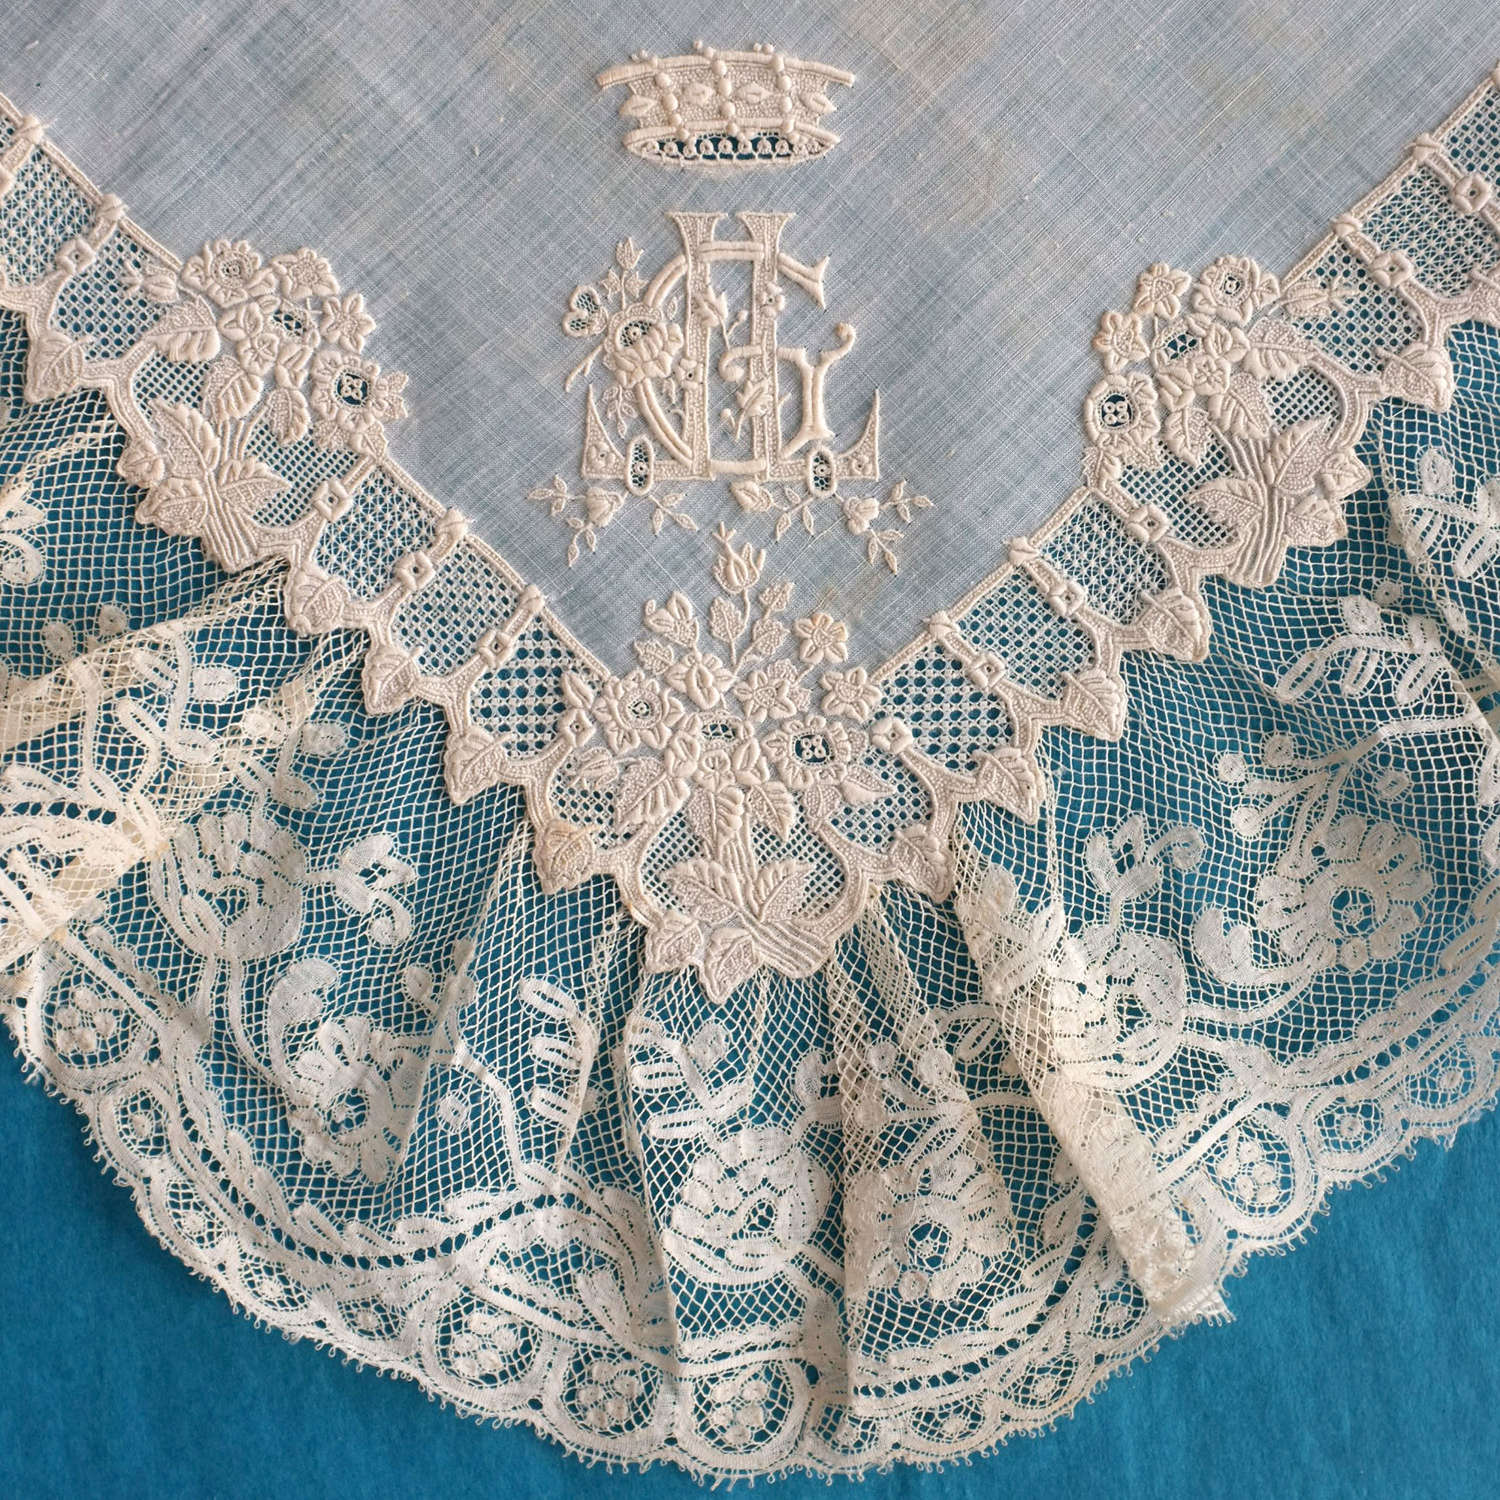 Antique 19th Century Whitework and Valenciennes Lace Handkerchief